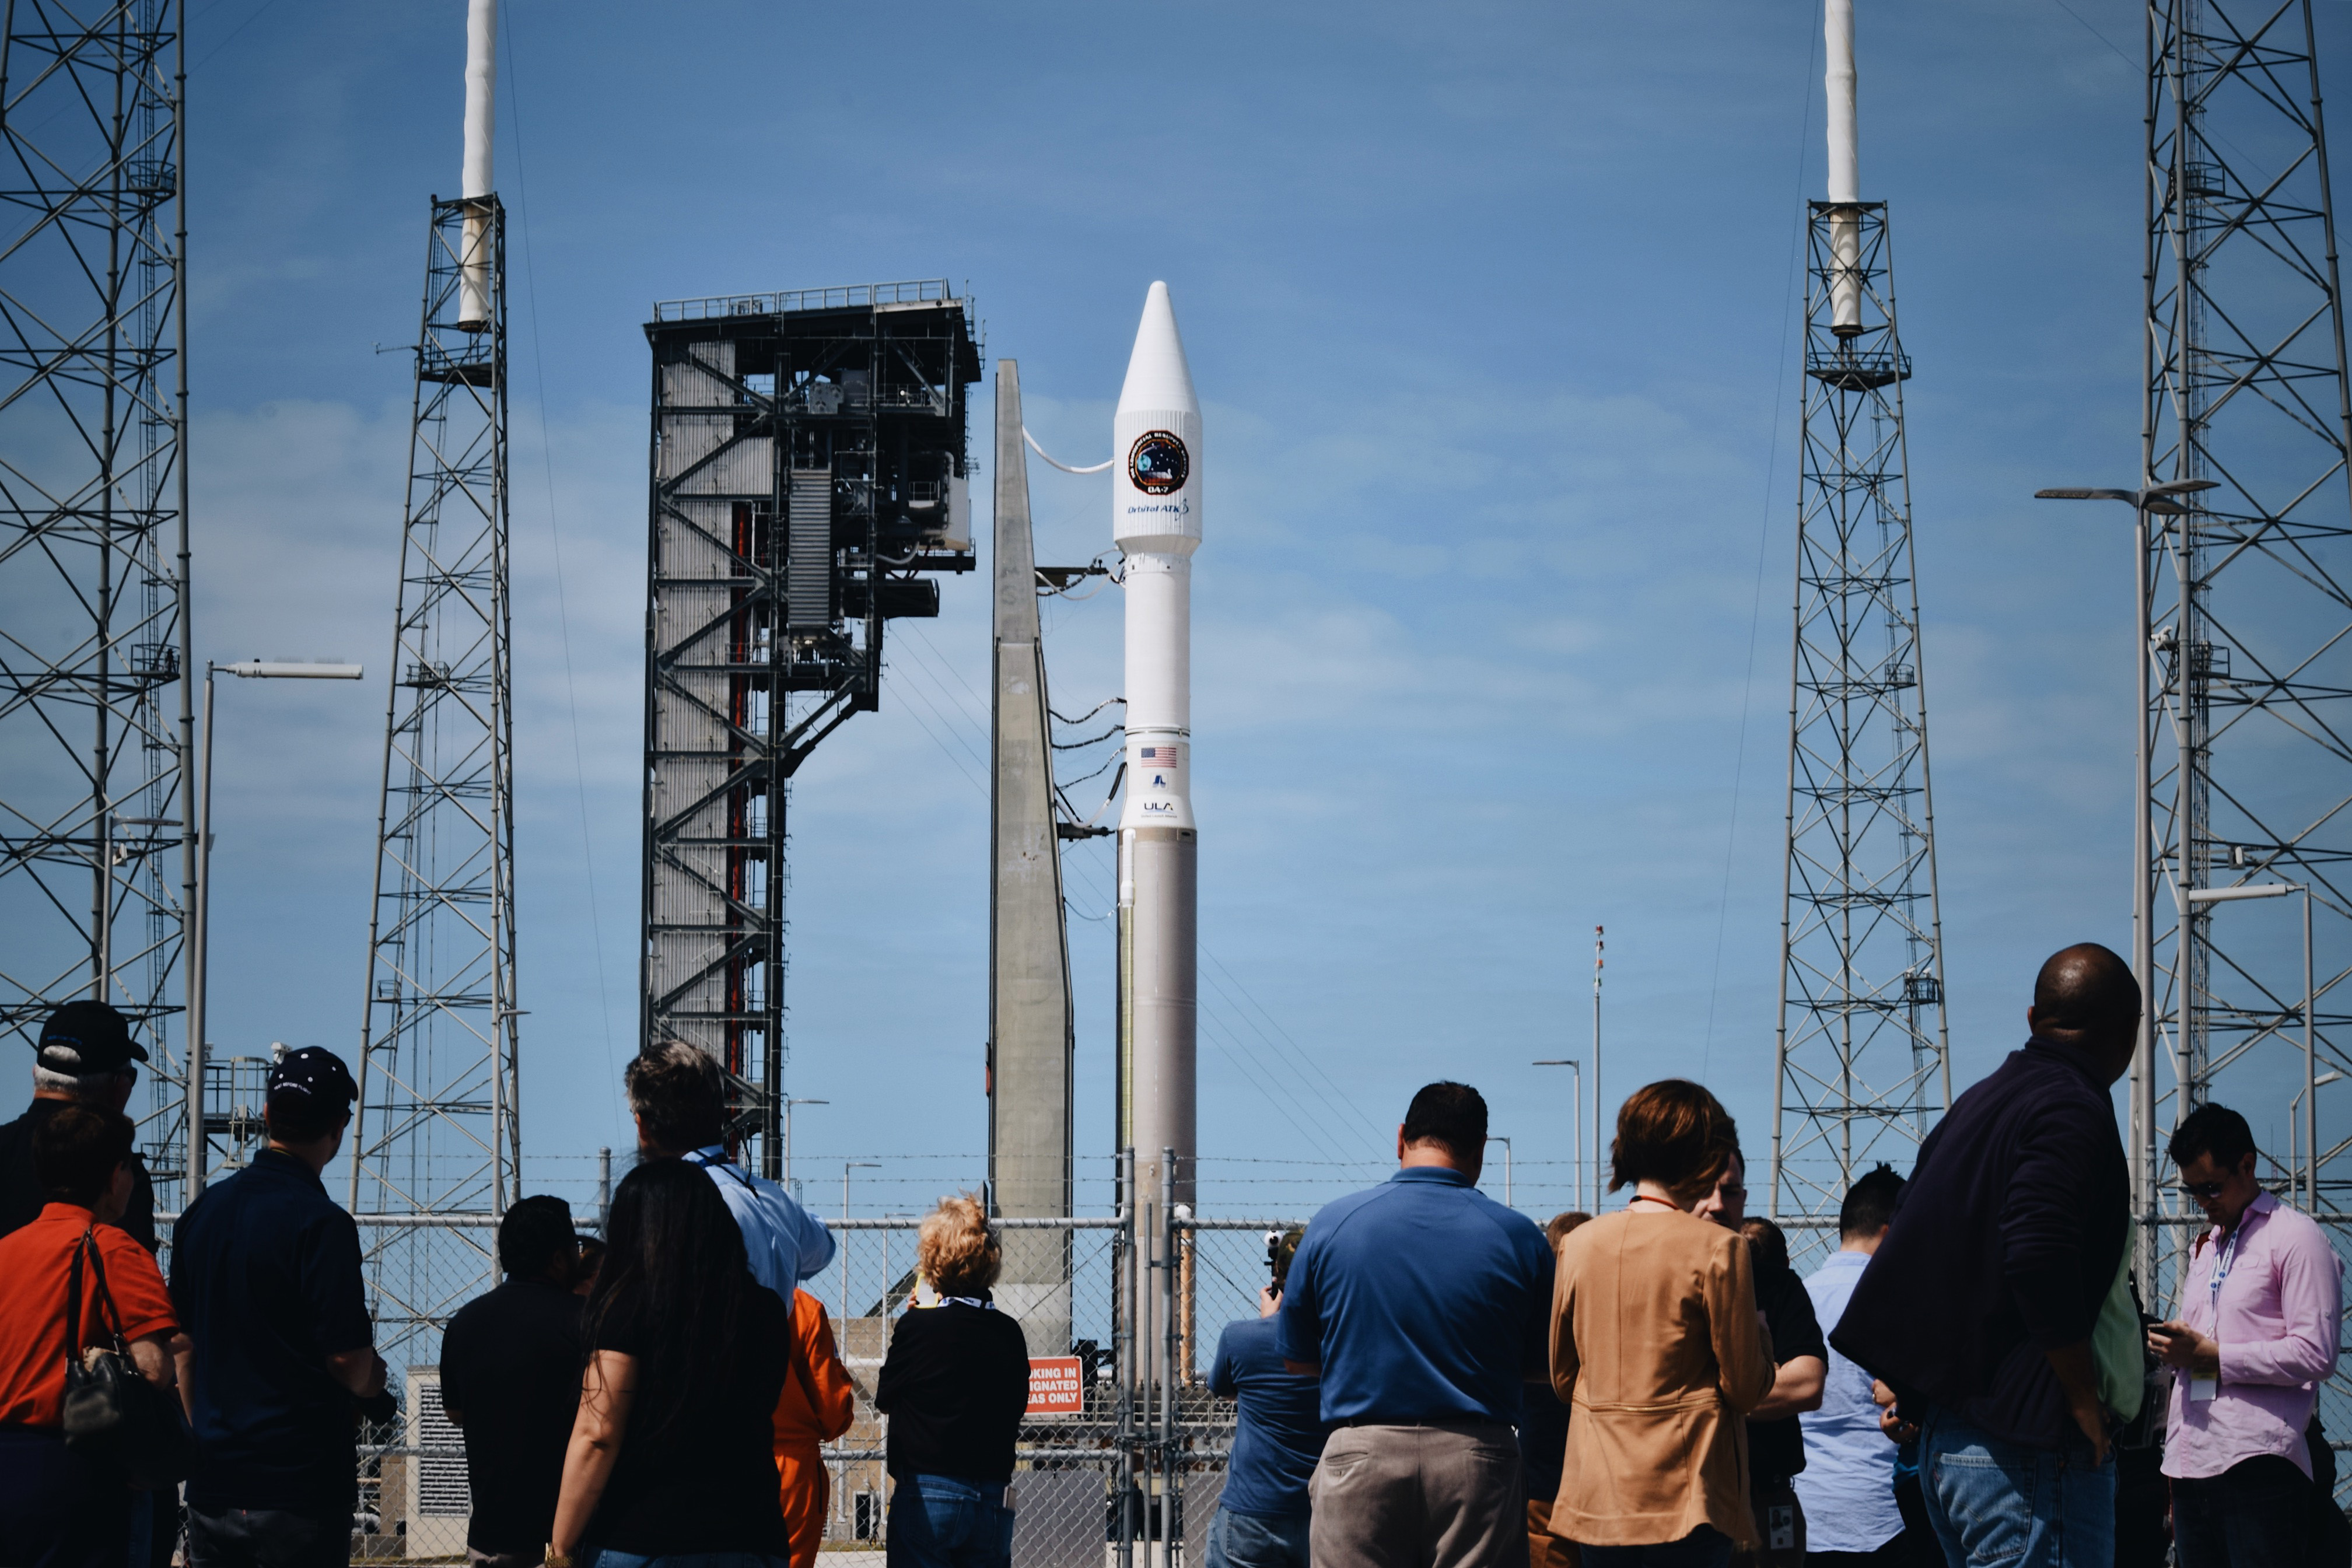 On the day before the mission, we were able visit the launchpad. This was NASA Orbital ATK's seventh mission as part of the Commercial Resupply Services Program for the International Space Station. The Cygnus Spacecraft, which held supplies along with several experiments to be conducted on the Space Station, rested on an Atlas V 401 rocket. Cygnus docked onto the International Space Station, and will be there until July 17, 2017. After its time is up, the Cygnus spacecraft will perform a controlled destructive reentry back to Earth. (Rafeed Hussain/UConn Photo)